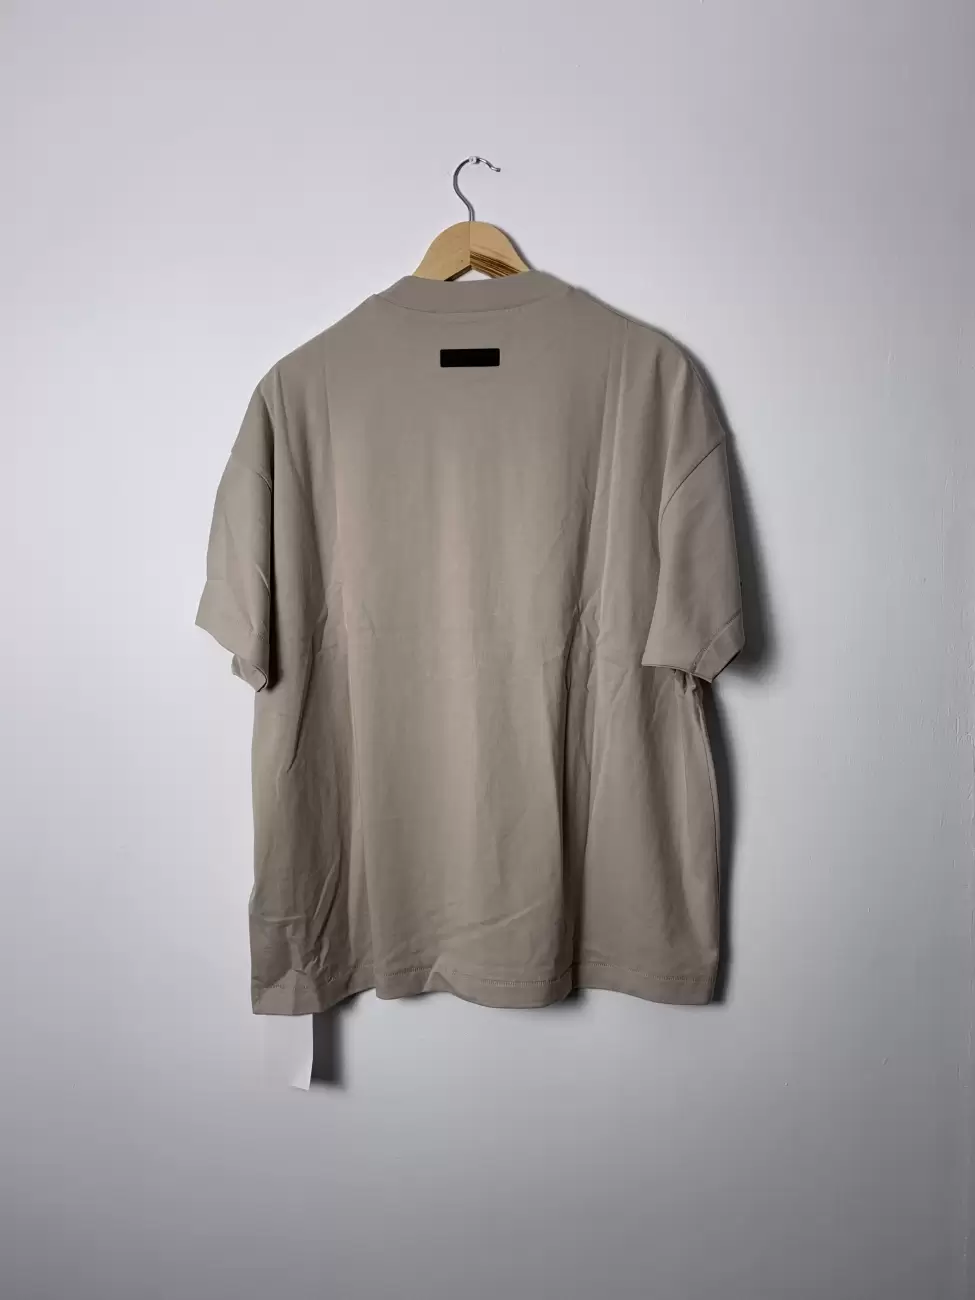 40618 - Fear Of God Essentials Ss24 Core Silver Cloud Tee | Item ...